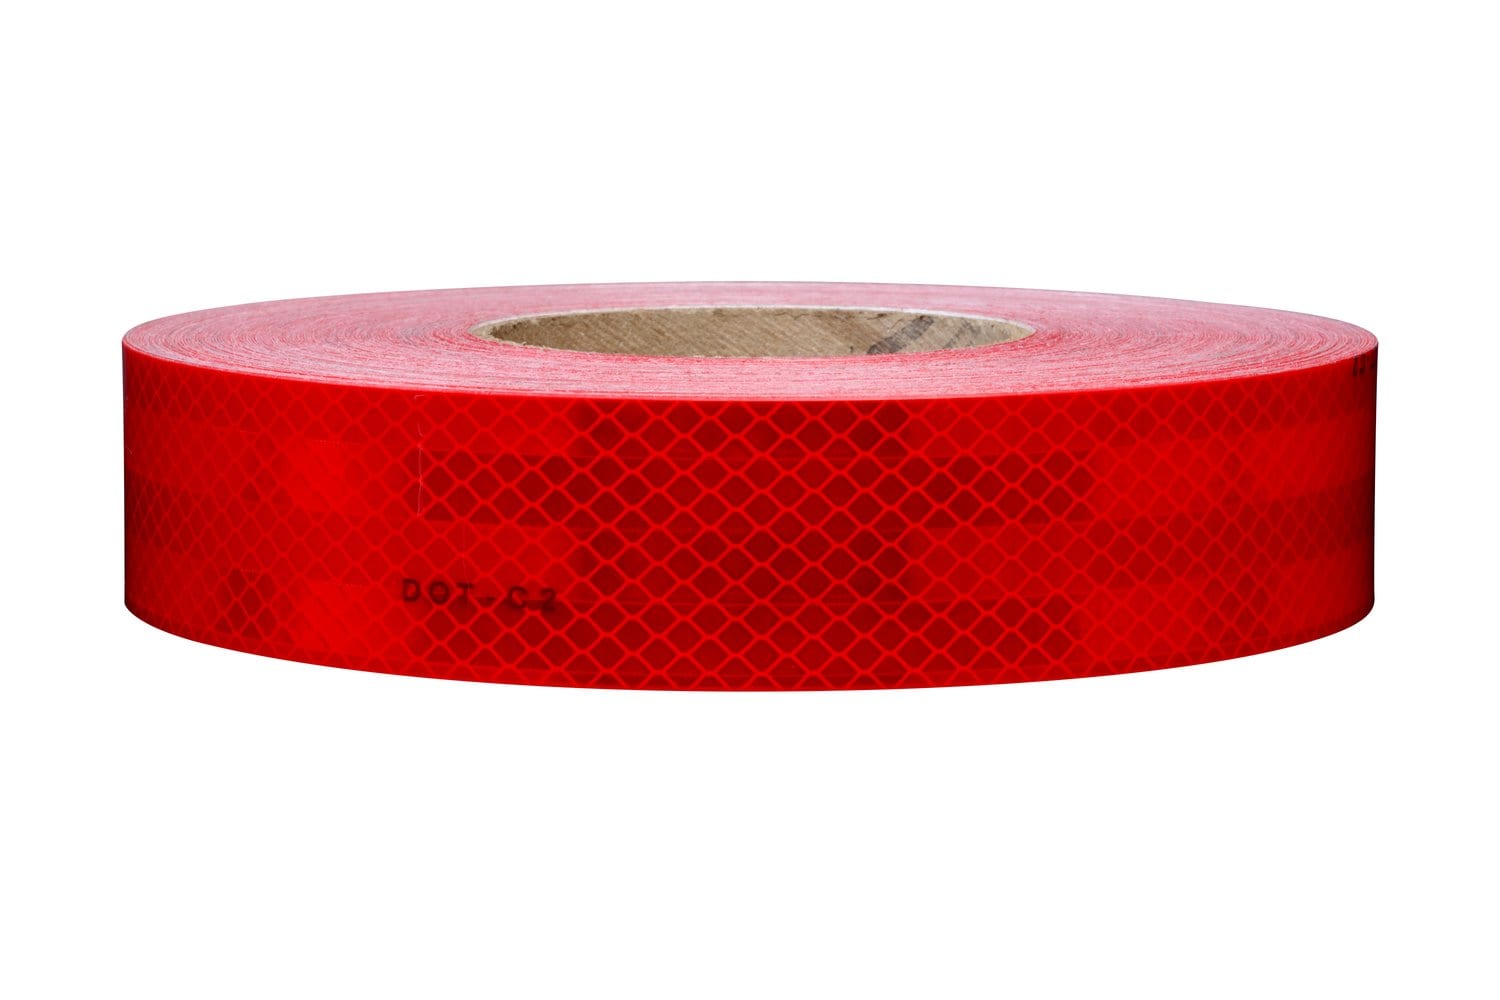 7100015581 - 3M Diamond Grade Conspicuity Marking 983-72, Red, 48 in, Roll
Configurable